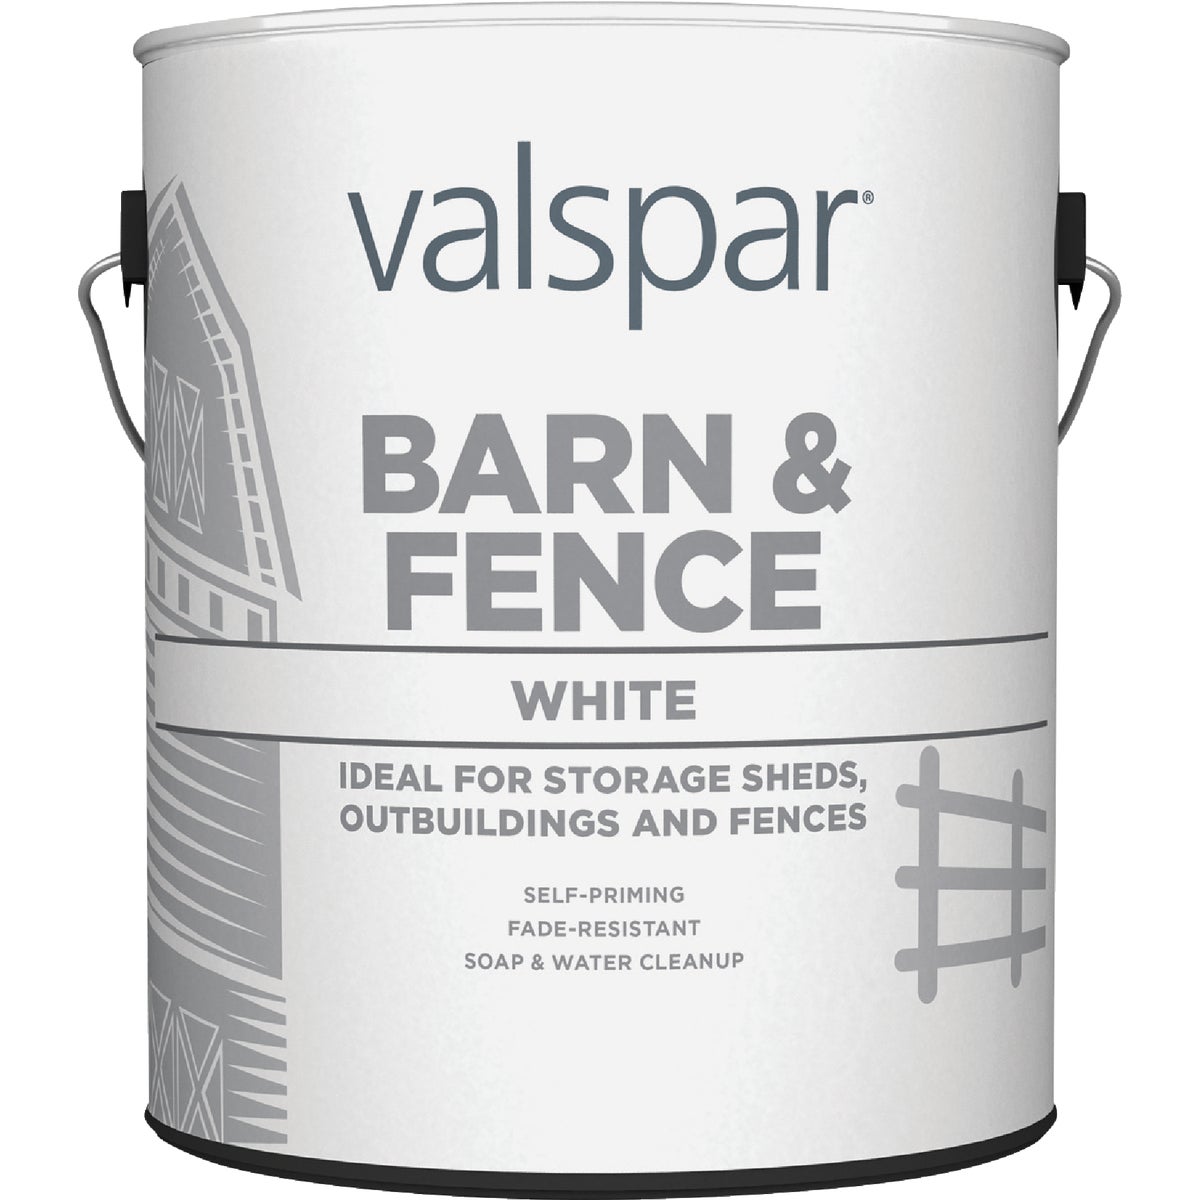 Valspar Latex Paint & Primer In One Flat Barn & Fence Paint, White, 1 Gal.